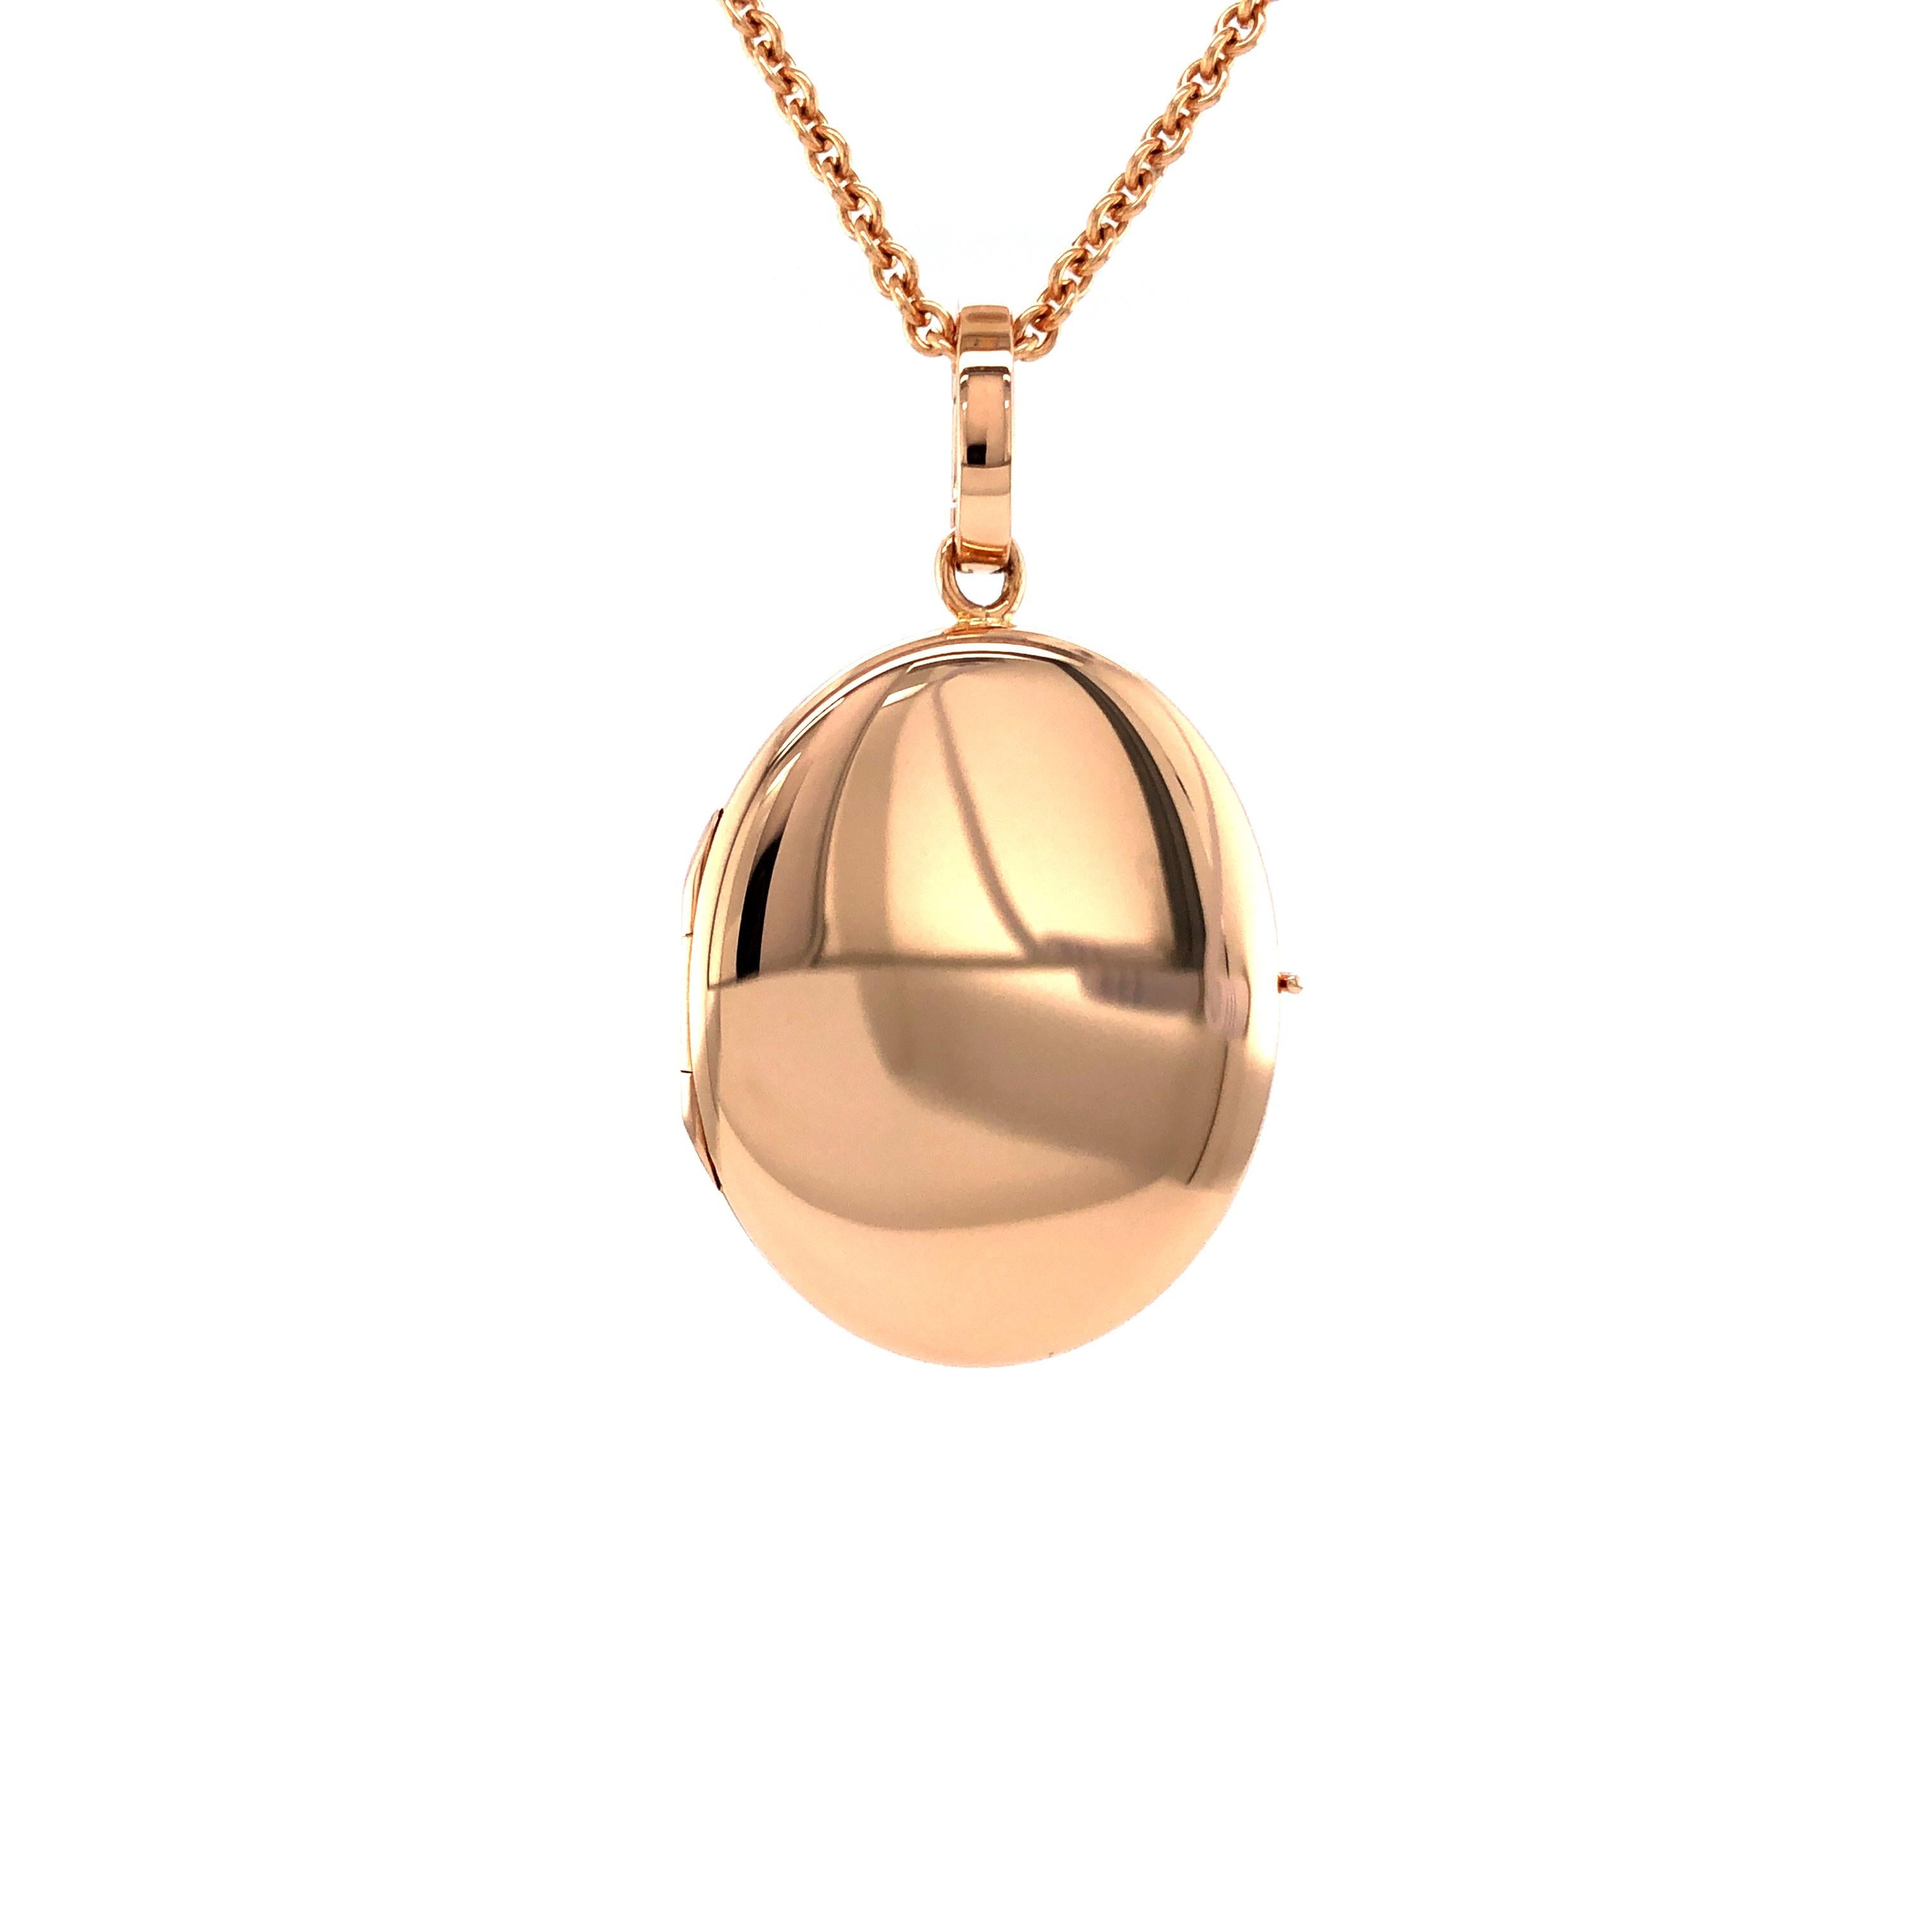 Oval Locket Pendant - 18k Rose Gold, Hallmark Collection by Victor Mayer, measurements app. 28.0 mm x 23.0 mm, two picture frames

About the creator Victor Mayer
Victor Mayer is internationally renowned for elegant timeless designs and unrivalled